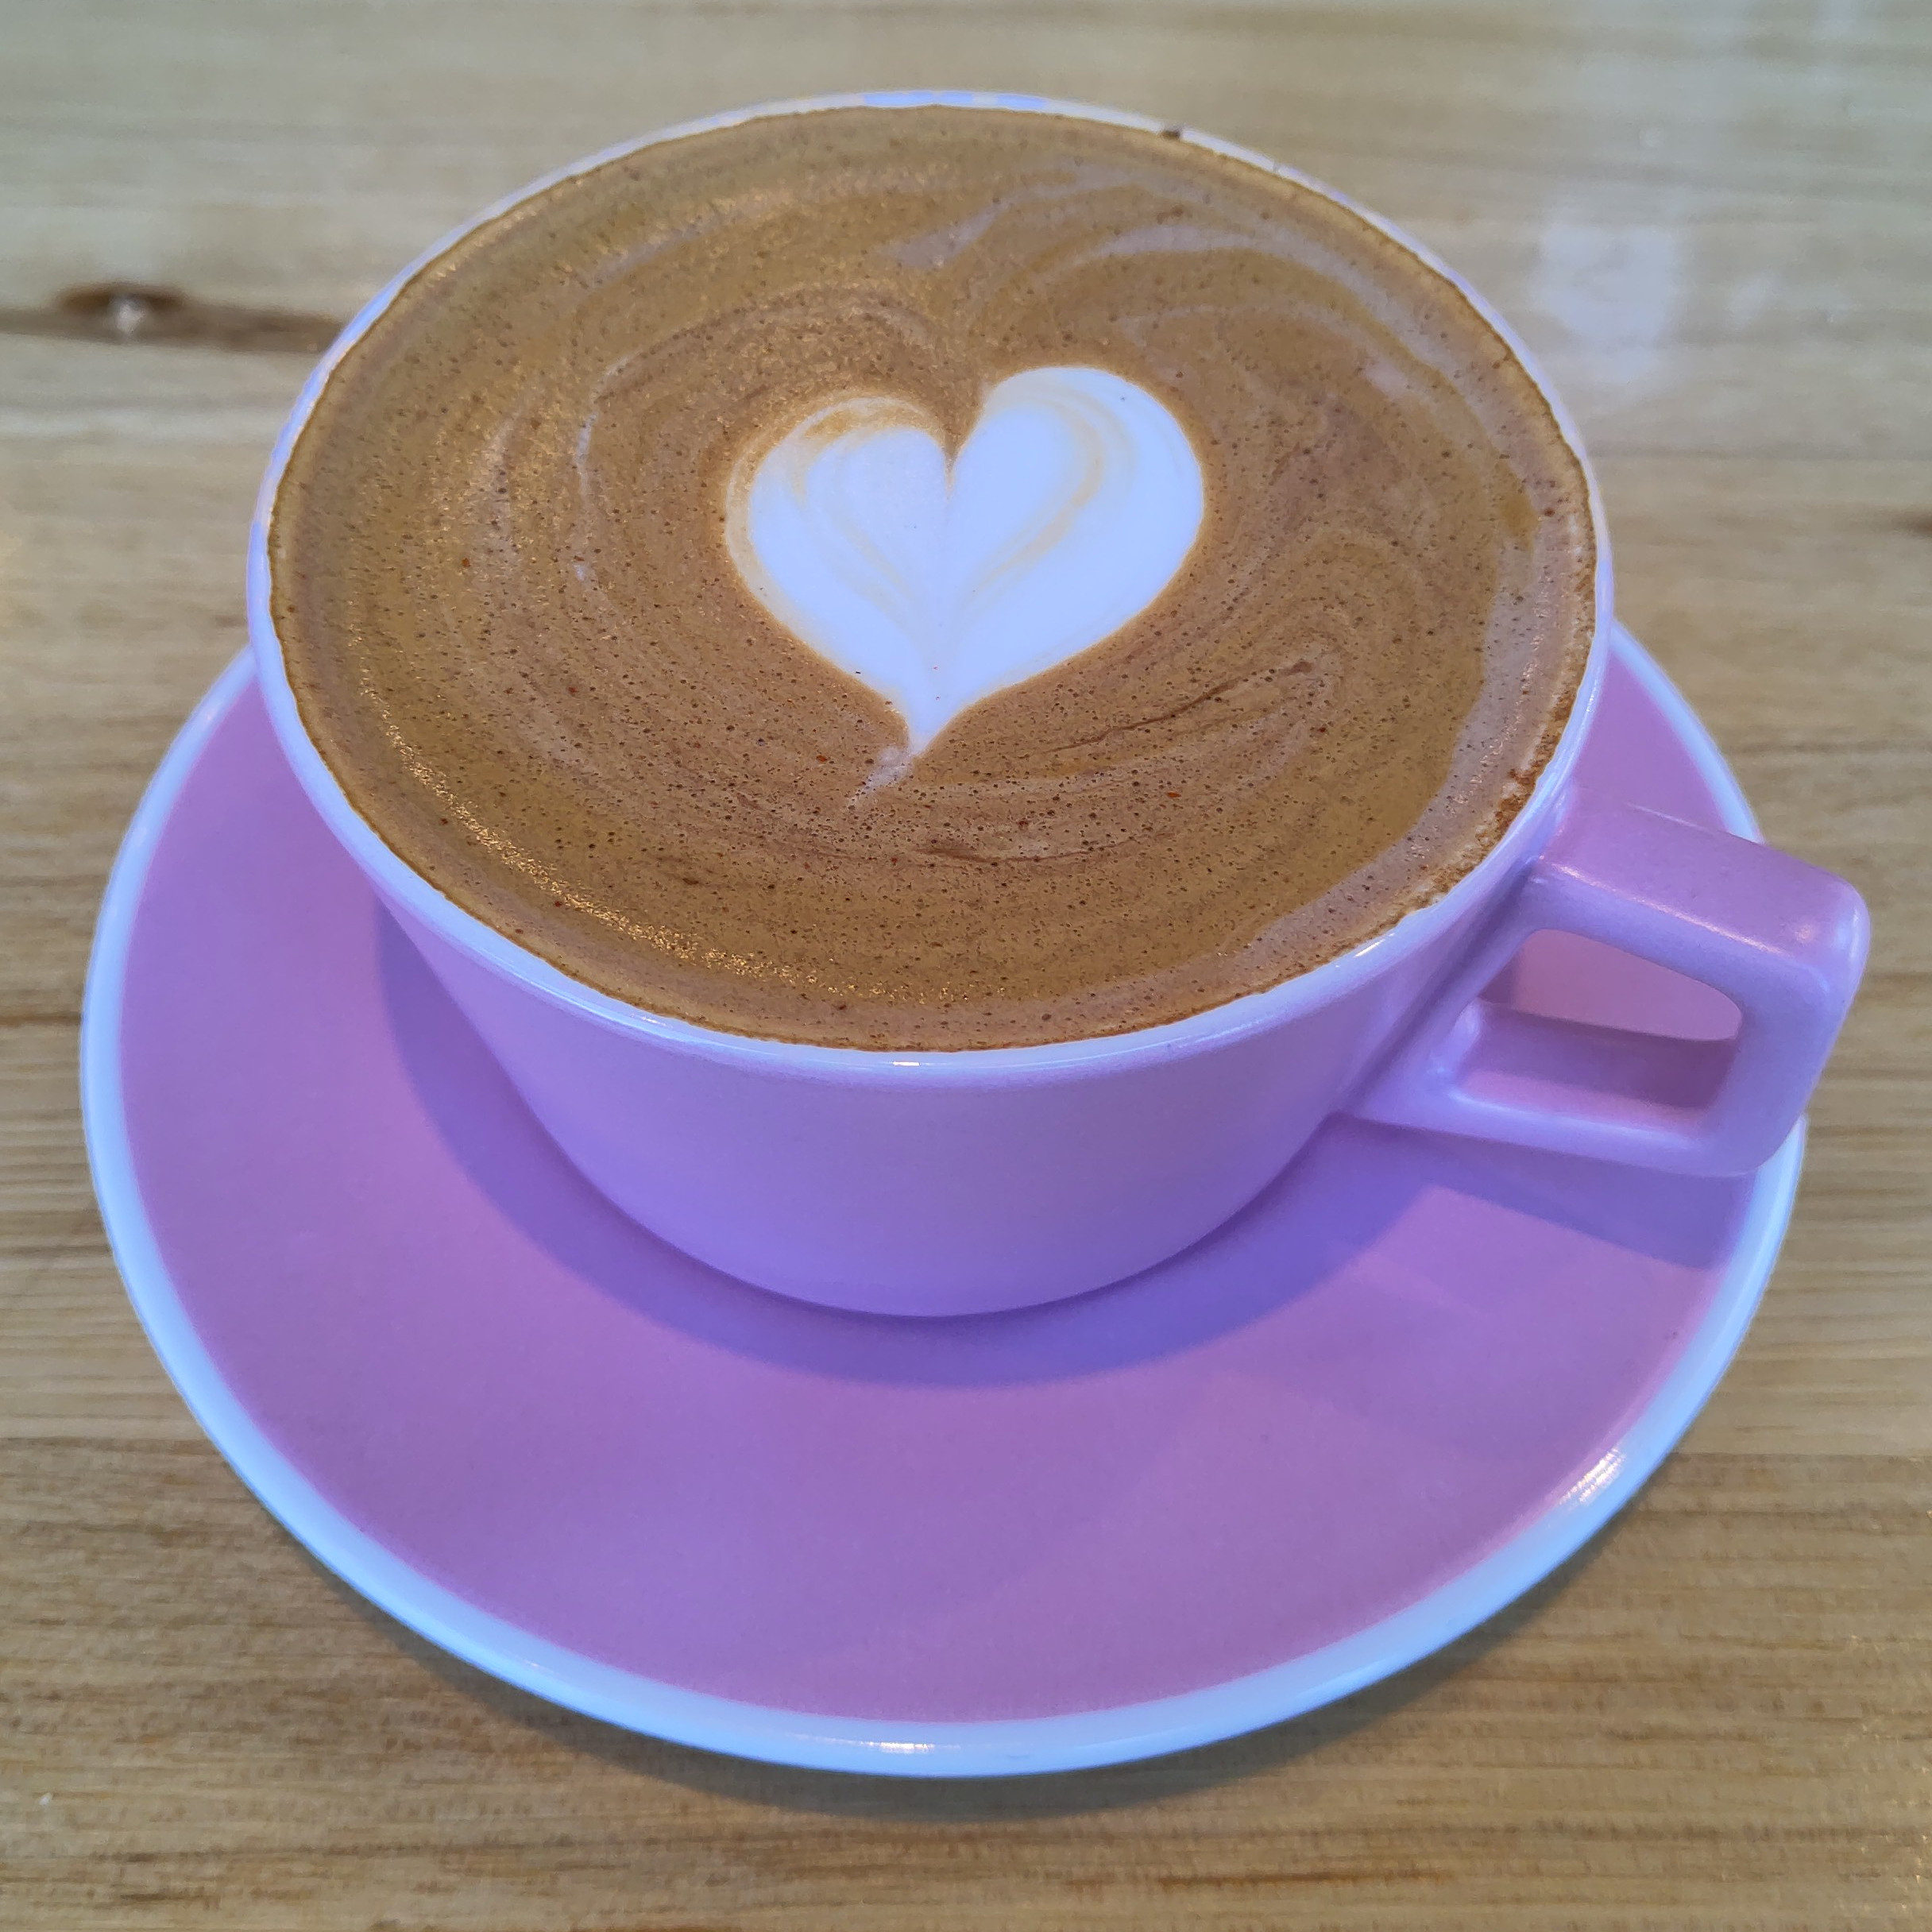 One of Voyager Craft Coffee's signature desintation drinks, the Santiago, served in a large, purple cup with a small latte art heart.